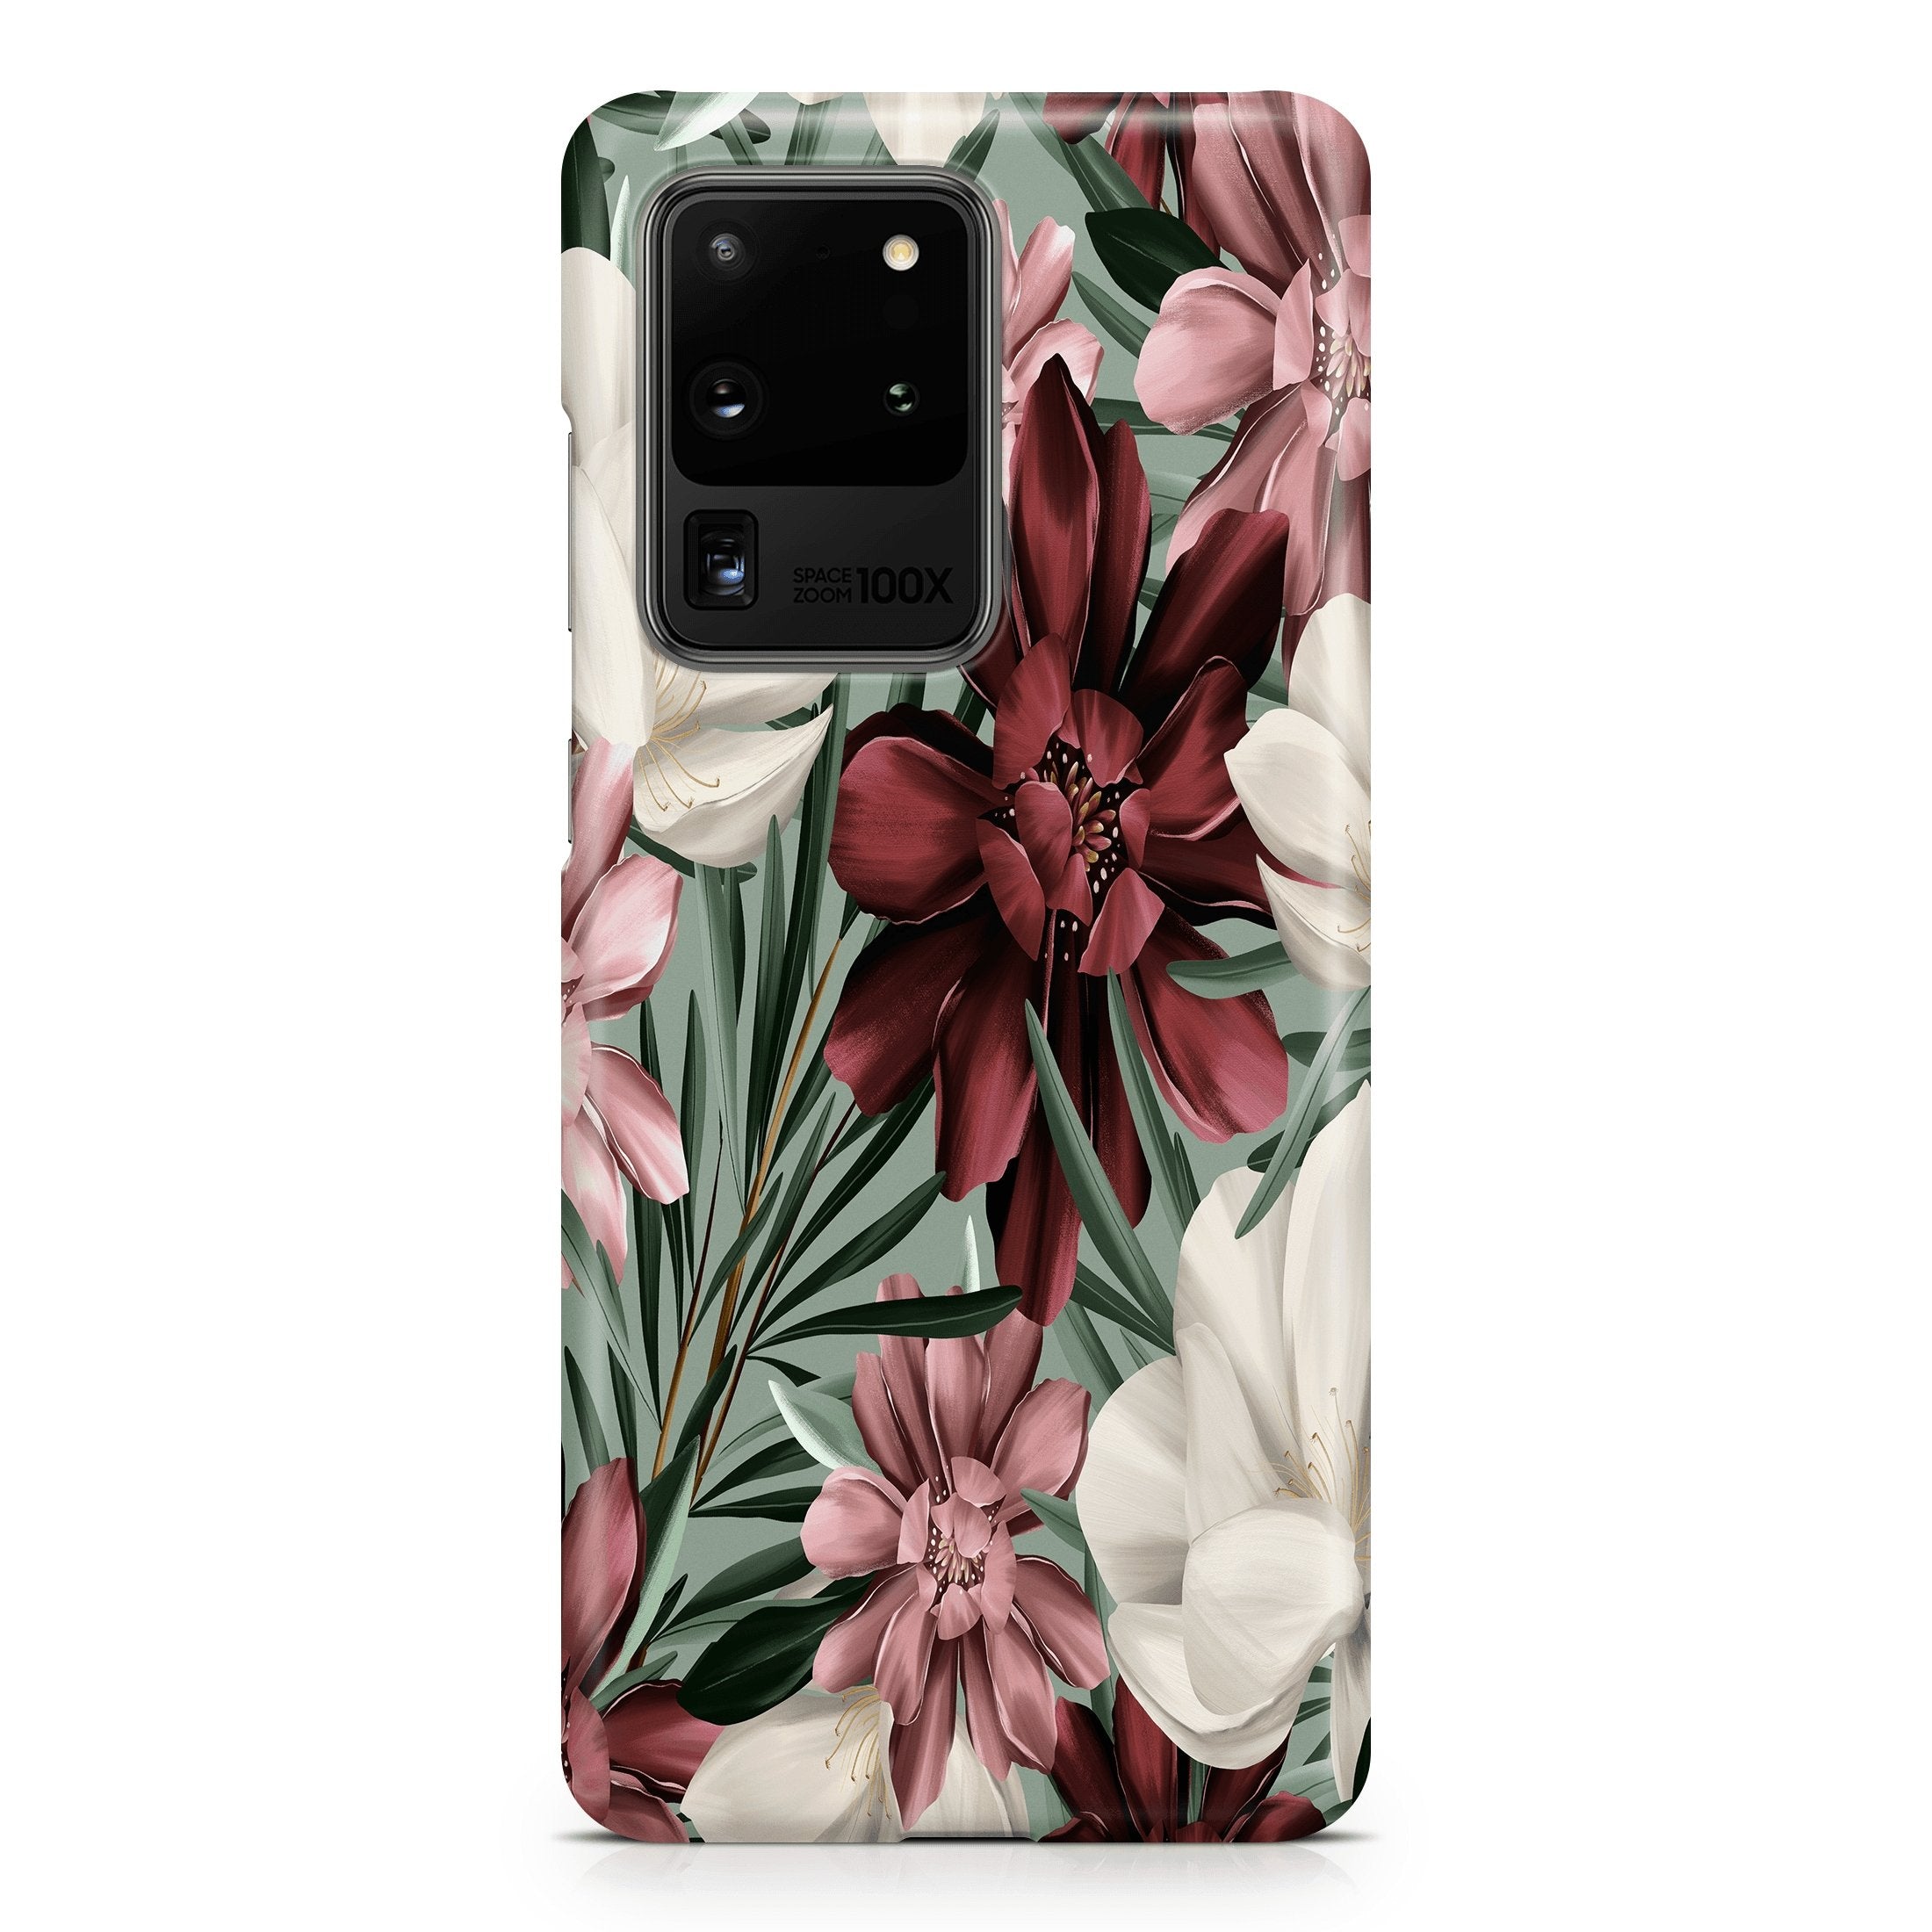 Red & Pink Floral - Samsung phone case designs by CaseSwagger